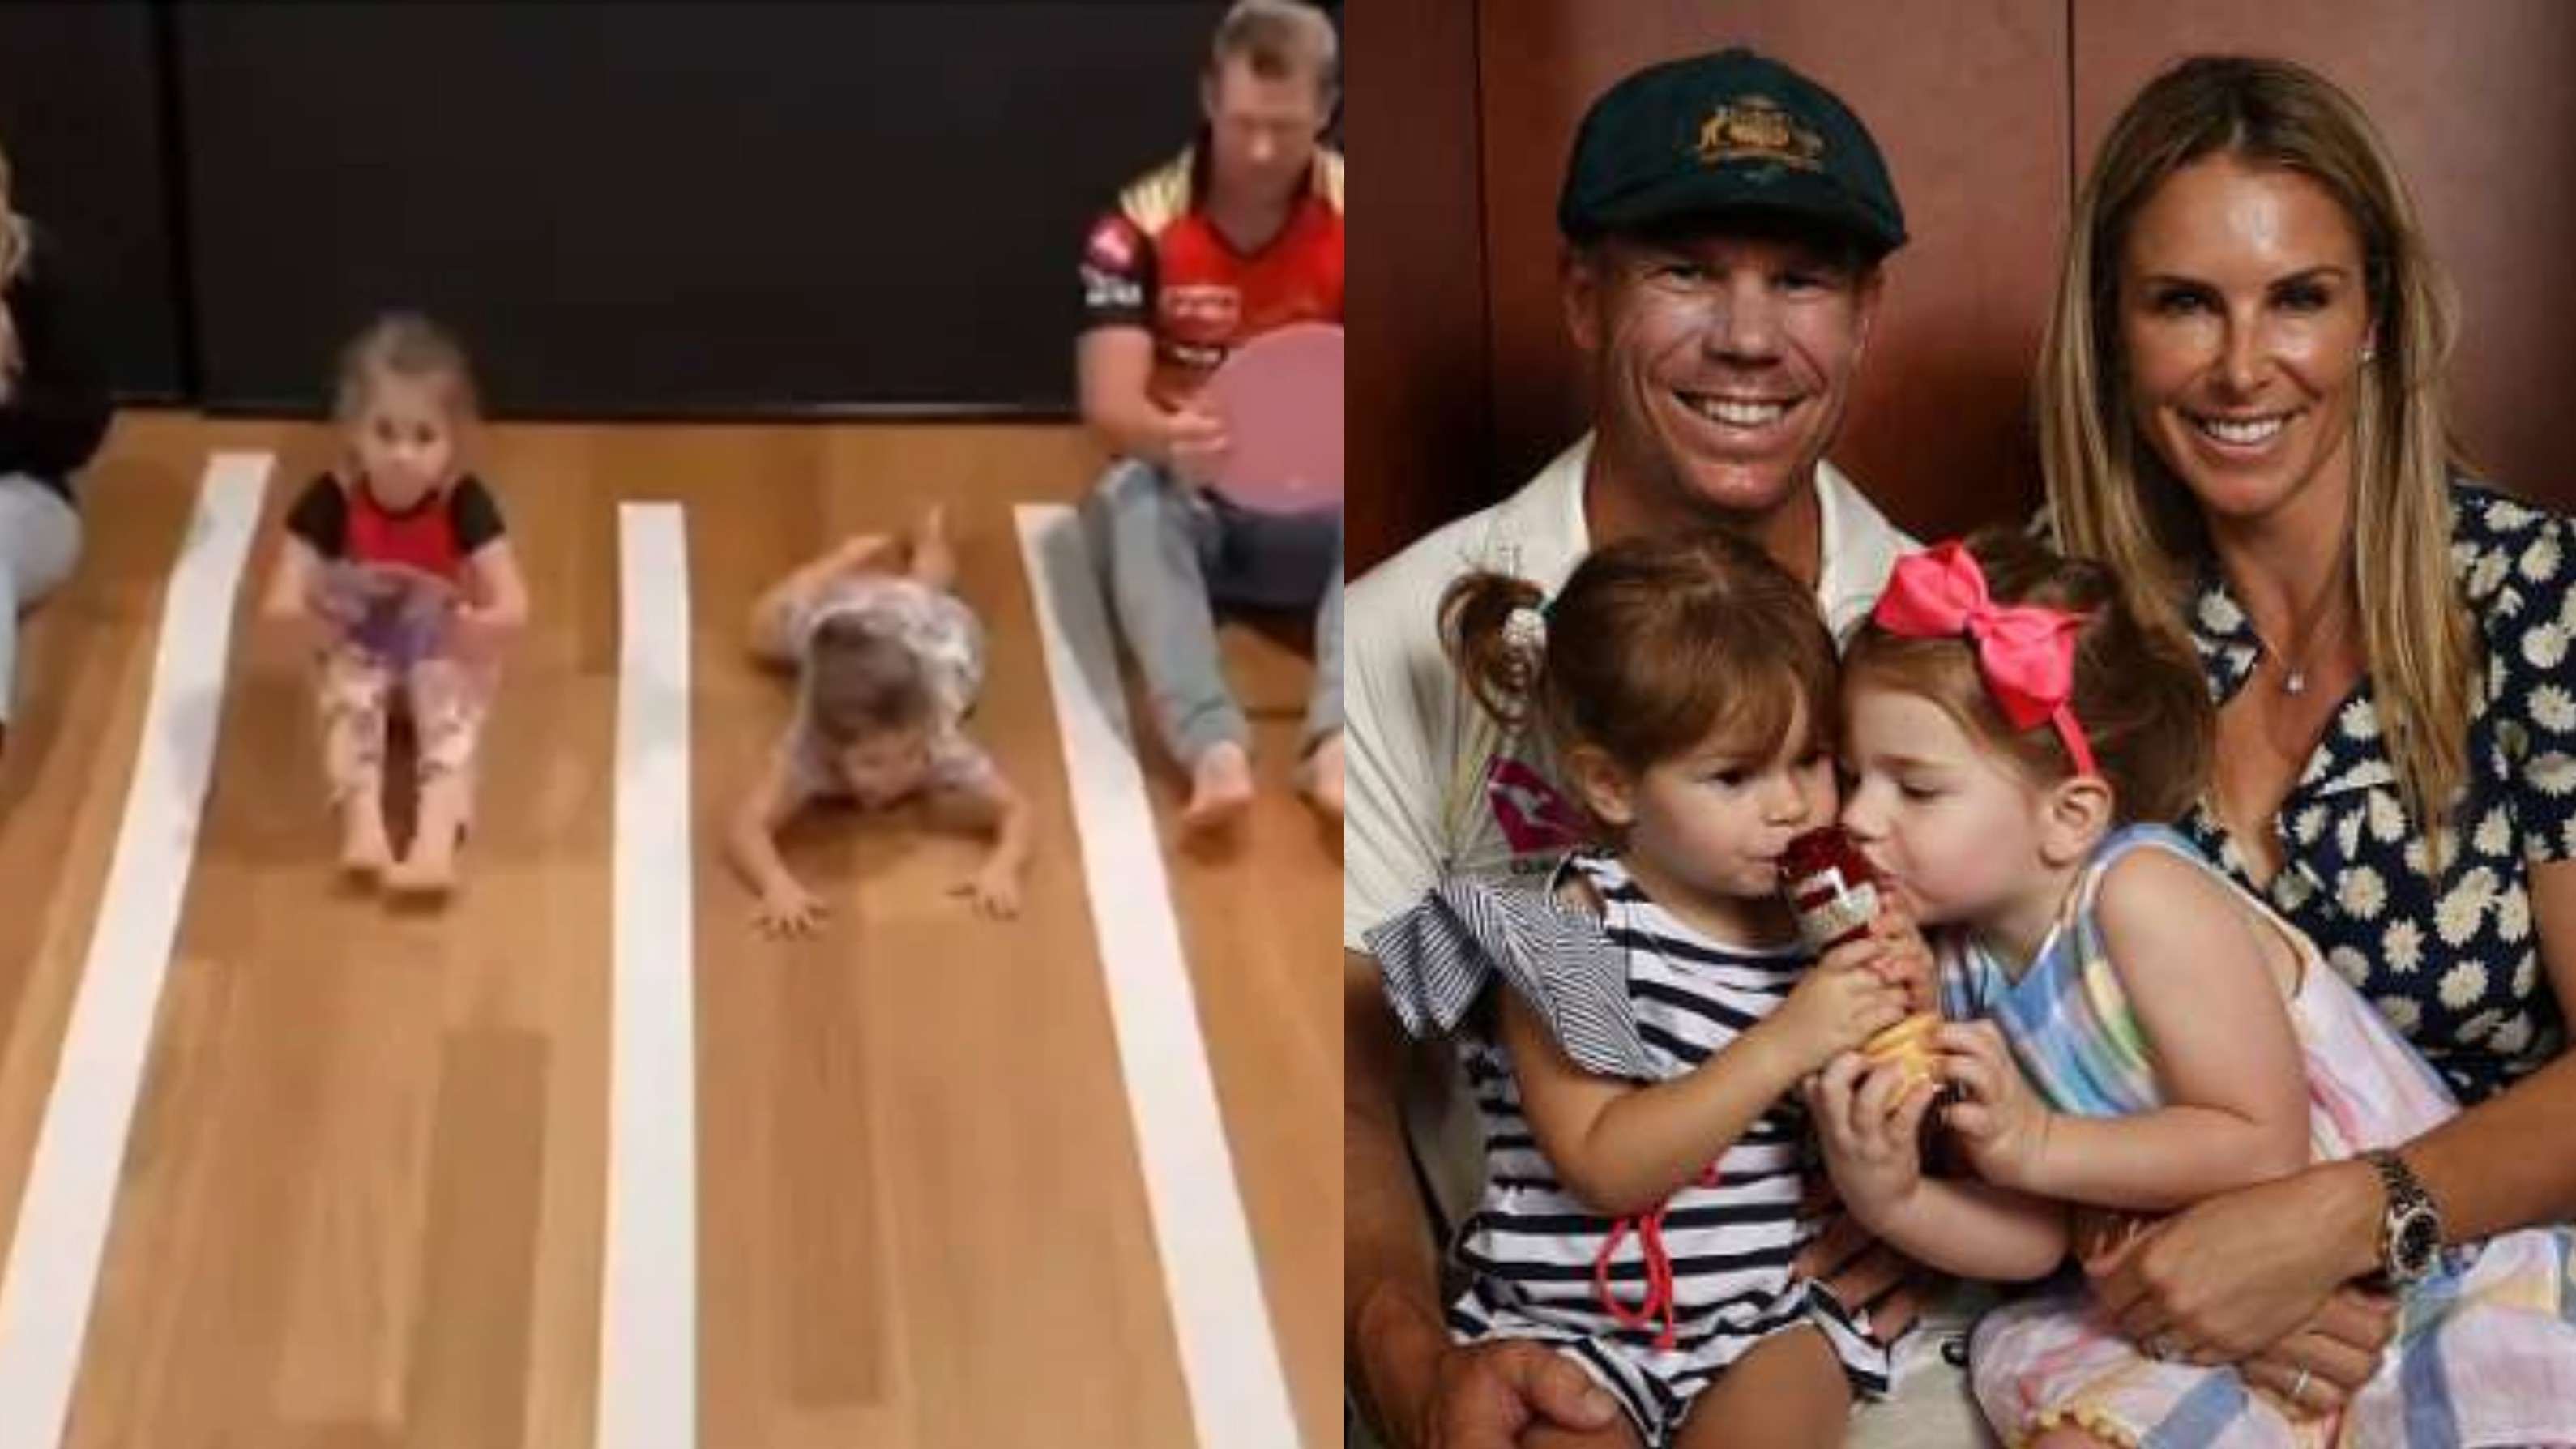 WATCH - David Warner and family participate in a unique 